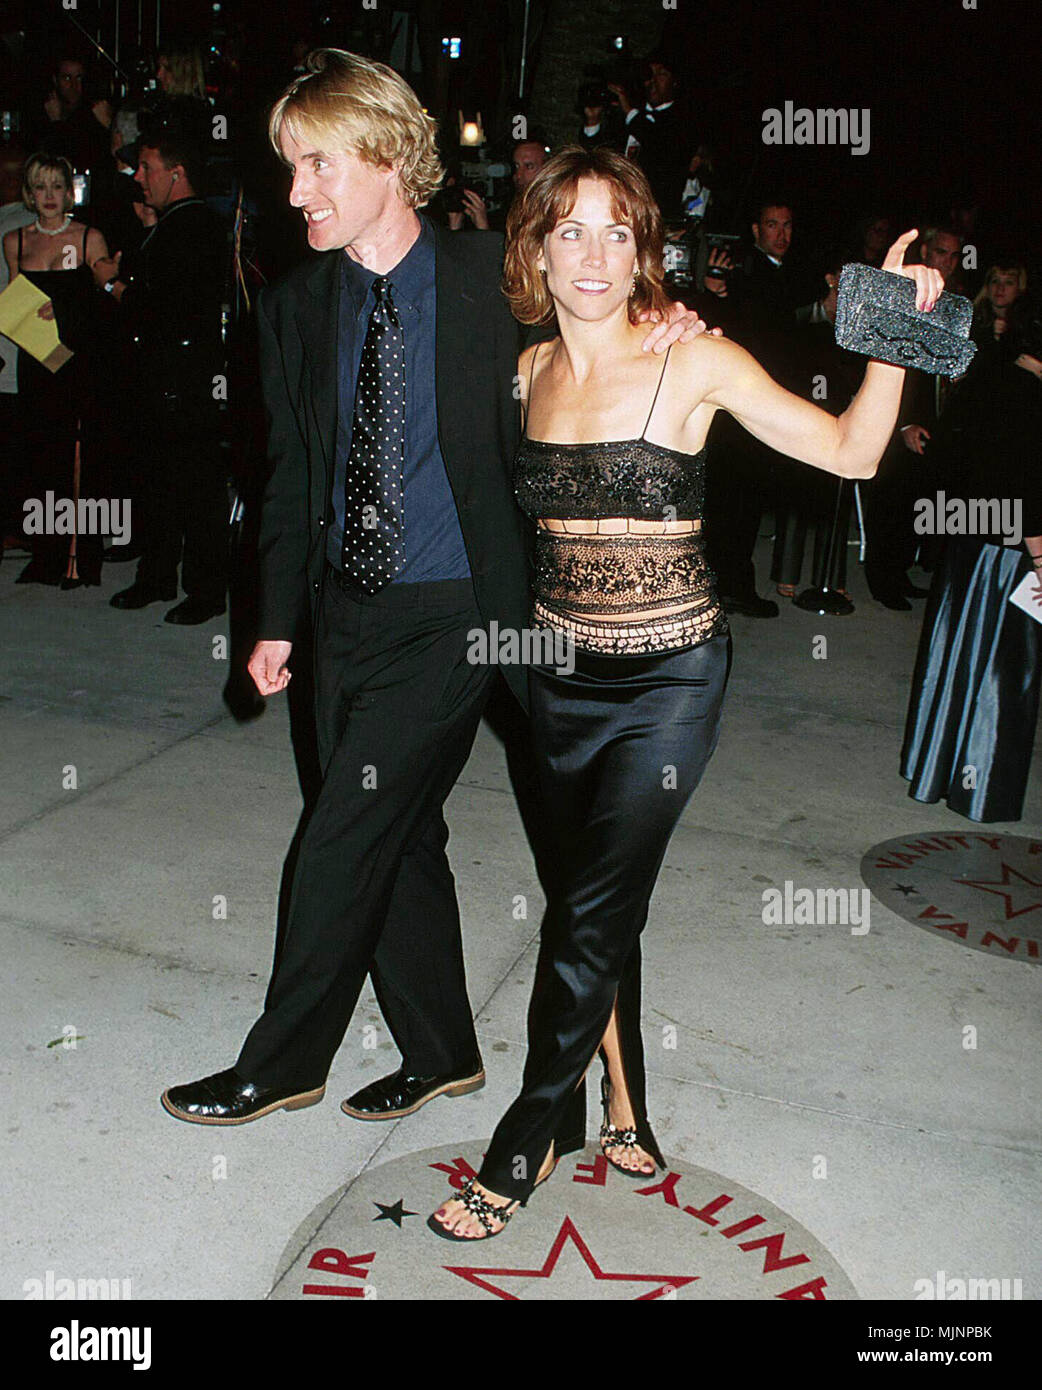 26 Mar 2000, Los Angeles, California, USA --- Owen Wilson and Sheryl Crow --- ' Tsuni / Bourquard 'Owen Wilson and Sheryl Crow Owen Wilson and Sheryl Crow Owen Wilson and Sheryl Crow Event in Hollywood Life - California,  Red Carpet Event, Vertical, USA, Film Industry, Celebrities,  Photography, Bestof, Arts Culture and Entertainment, Topix  Celebrities fashion /  from the Red Carpet-1994-2000, one person, Vertical, Best of, Hollywood Life, Event in Hollywood Life - California,  Red Carpet and backstage, USA, Film Industry, Celebrities,  Photography, Bestof, Arts Culture and Entertainment,  To Stock Photo